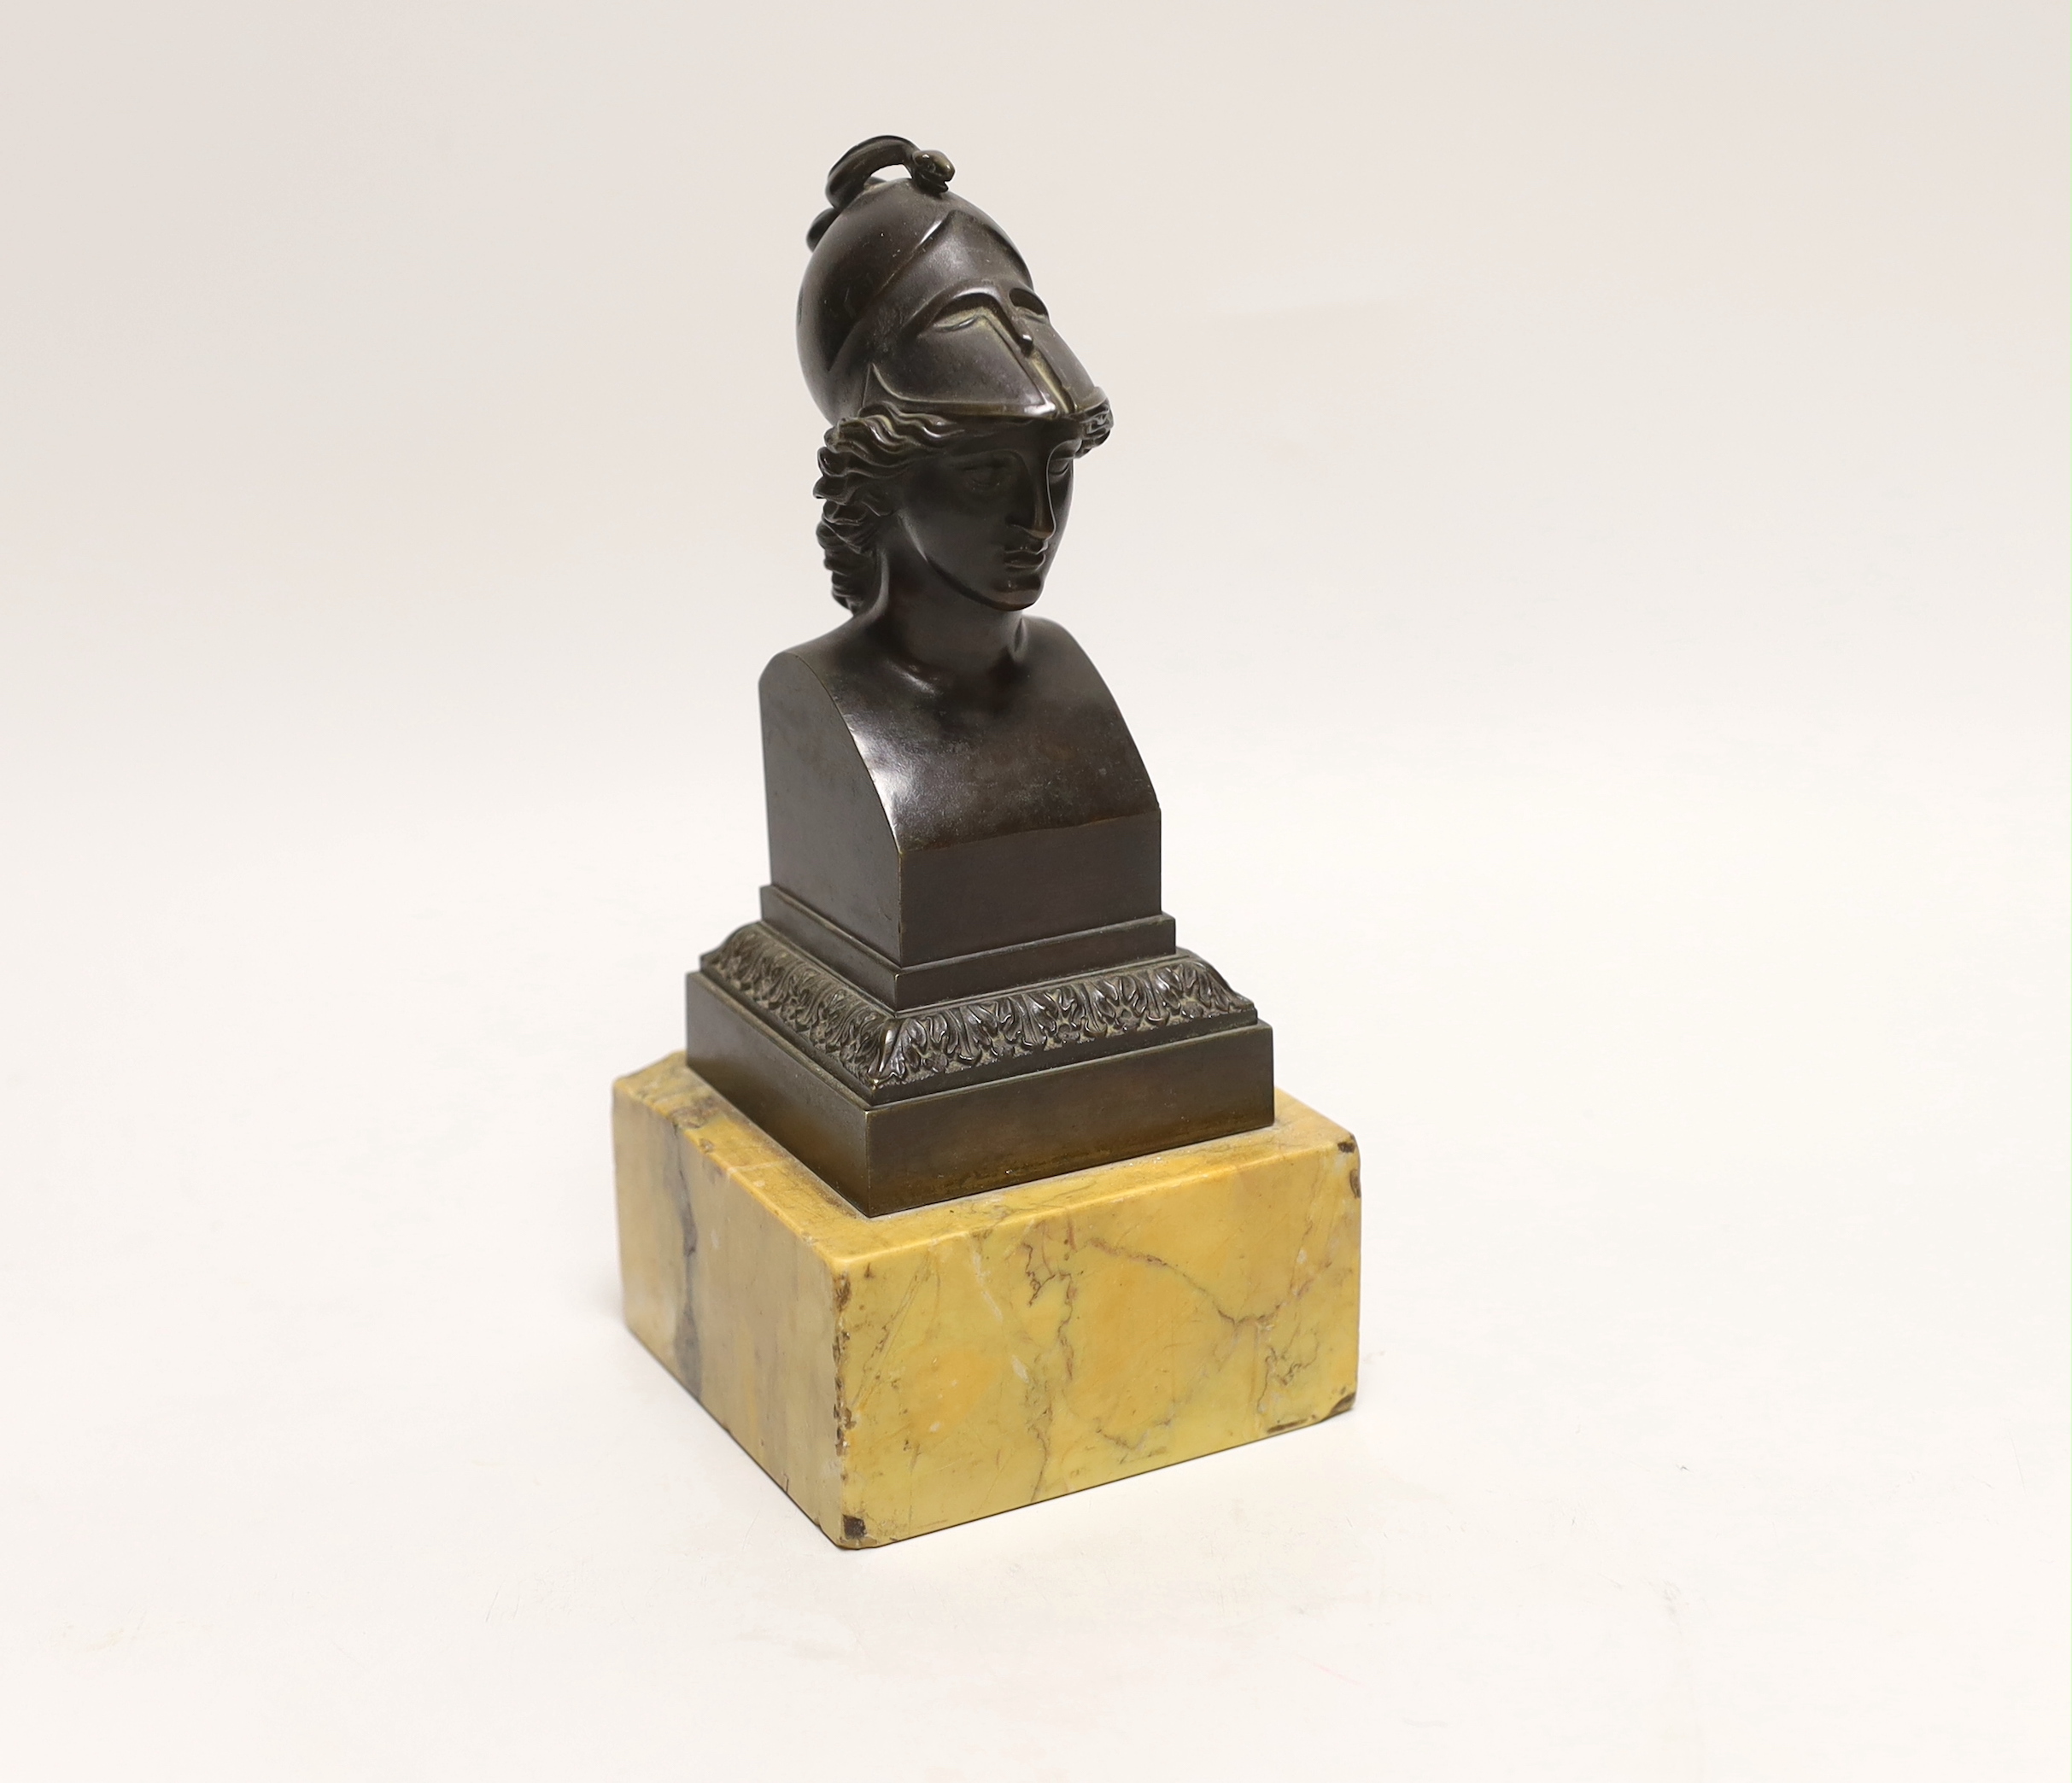 After the Antique, a bronze bust of Athena, on a Sienna marble plinth, approximately 23cm high